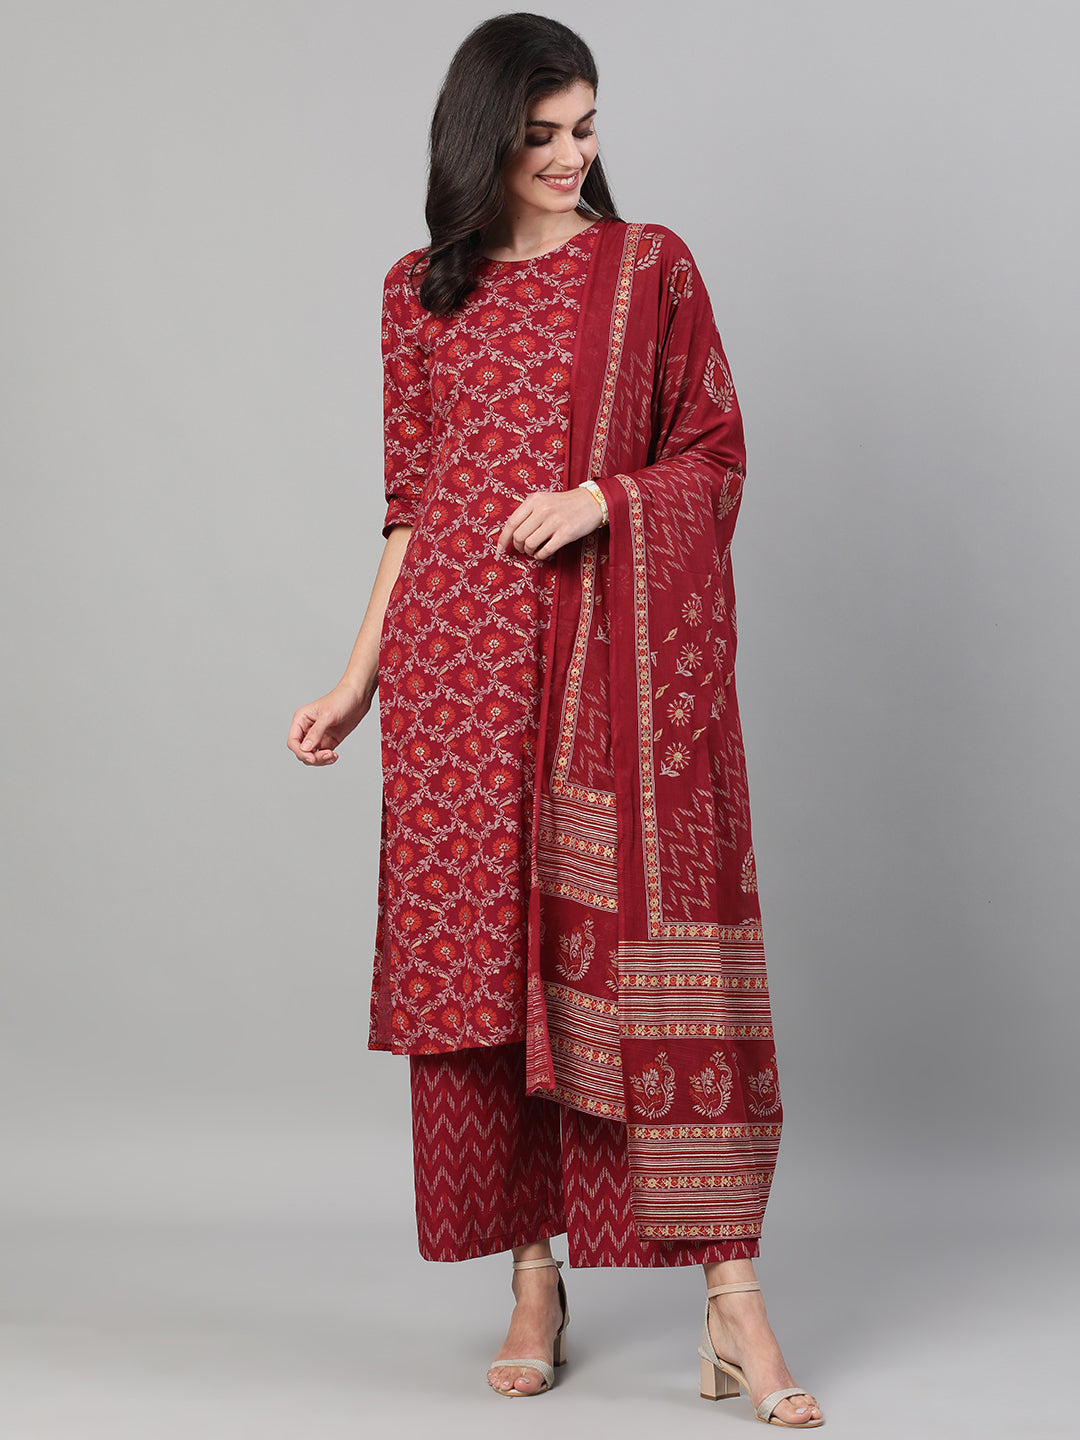 Women's Burgundy Gold Printed Three-Quarter Sleeves Straight Kurta With Palazzo And Dupatta With Pockets And Face Mask - Nayo Clothing